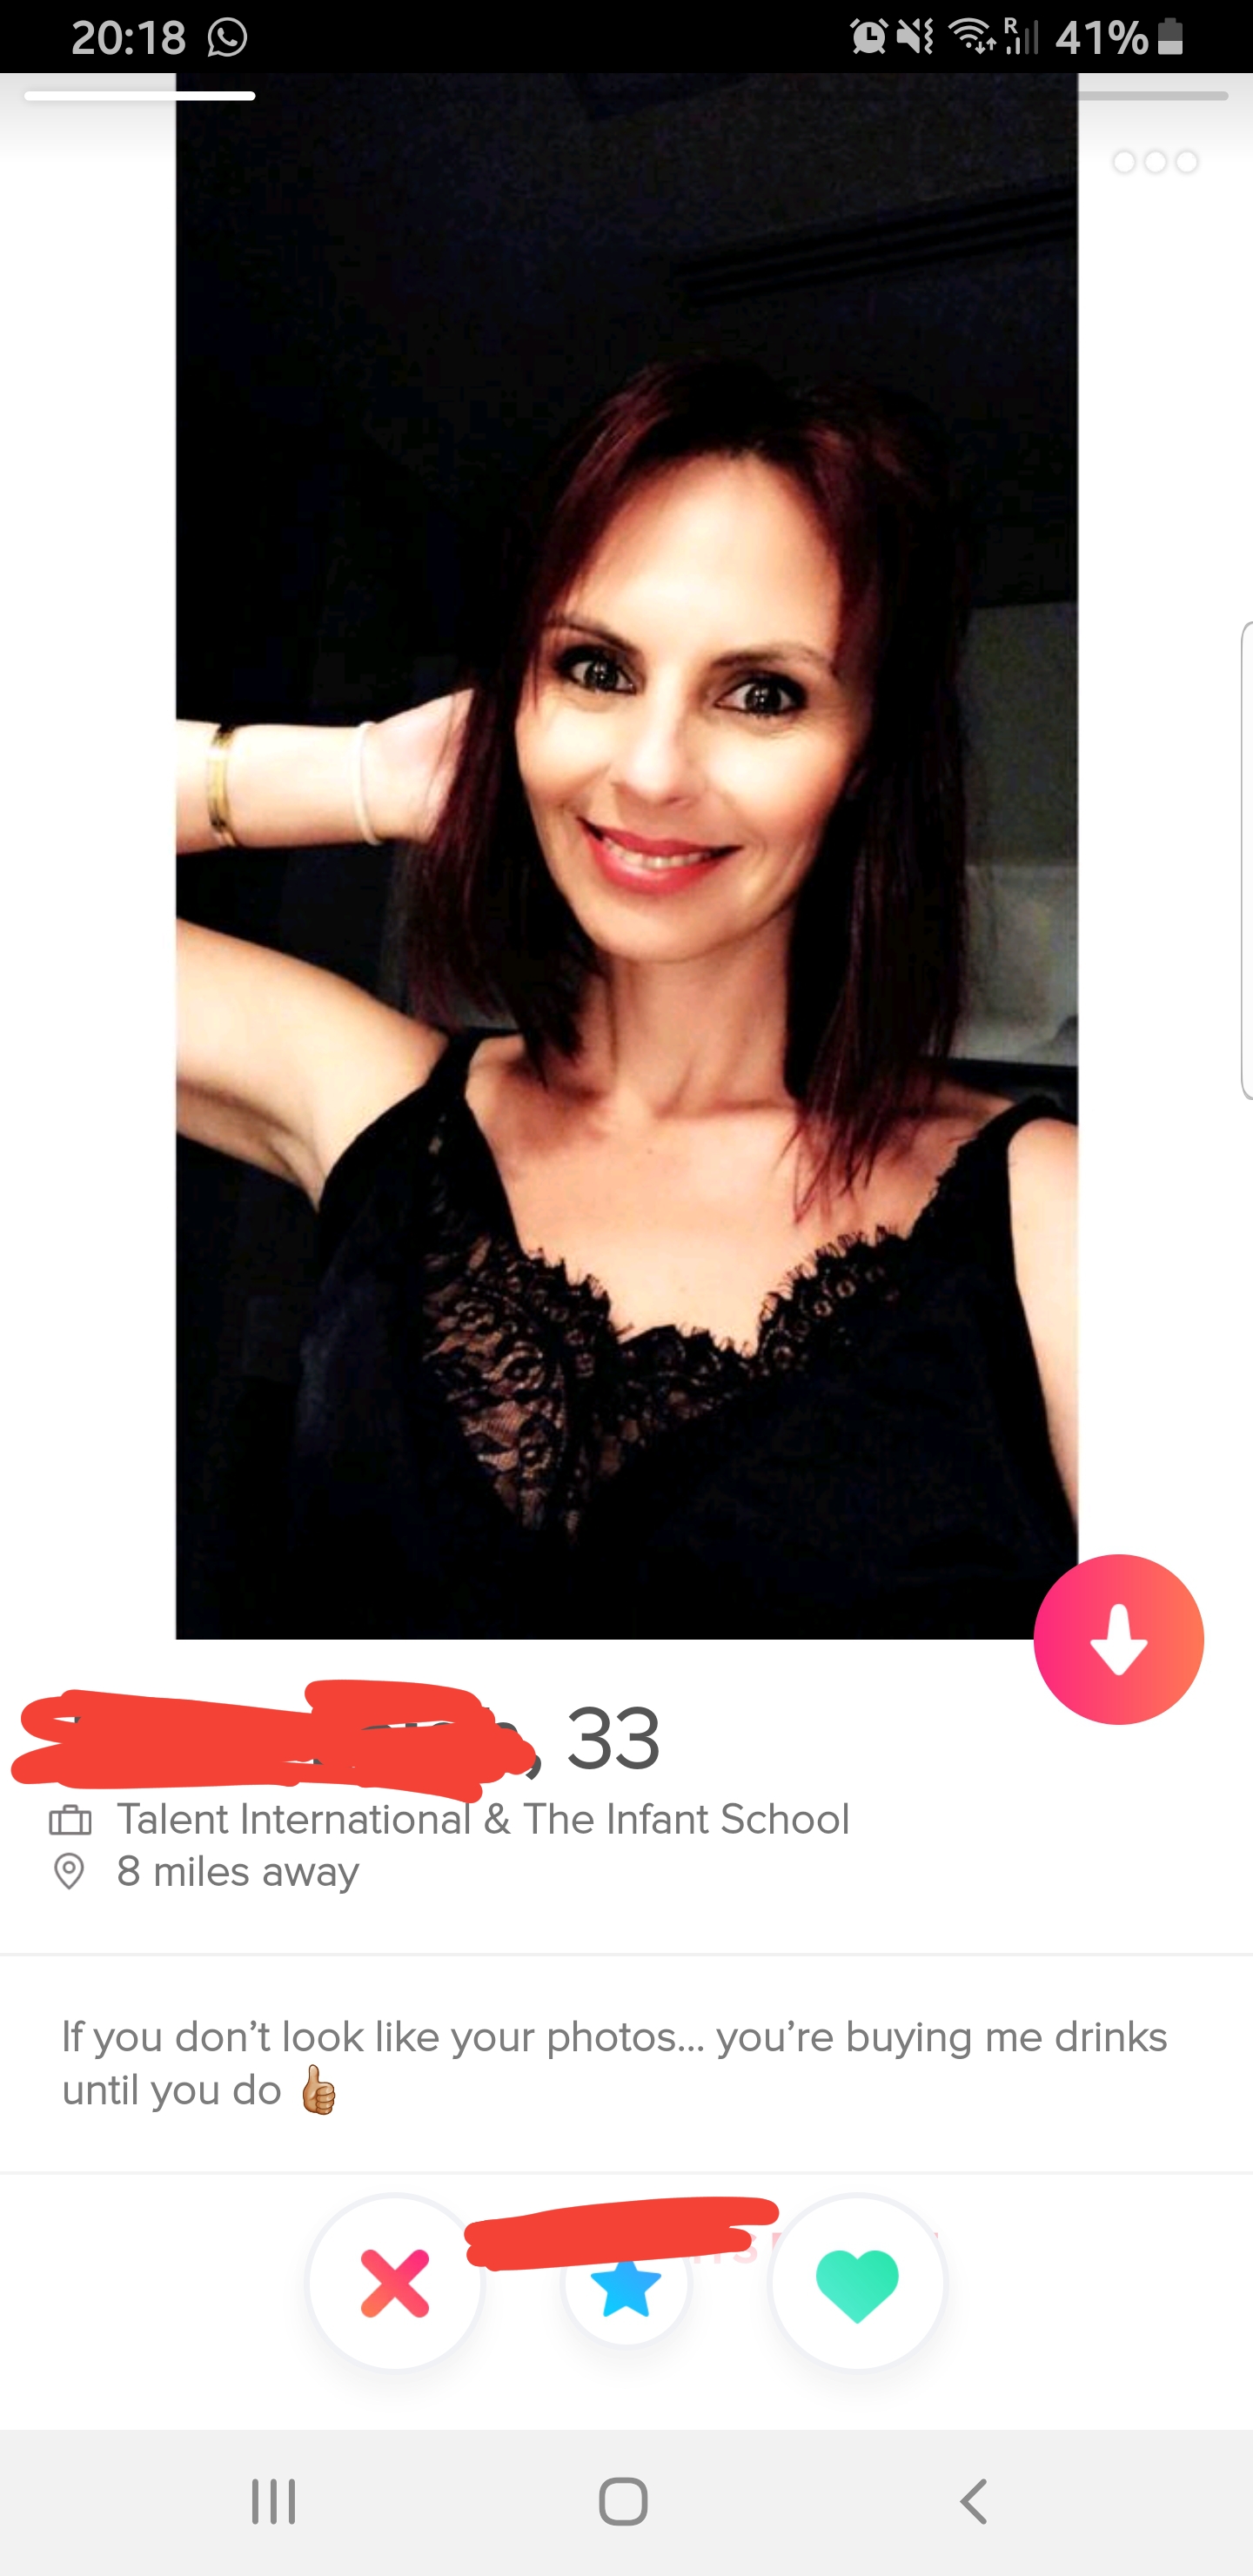 tinder - shoulder - CN47% 33 Talent International & The Infant School 8 miles away If you don't look your photos... you're buying me drinks until you do